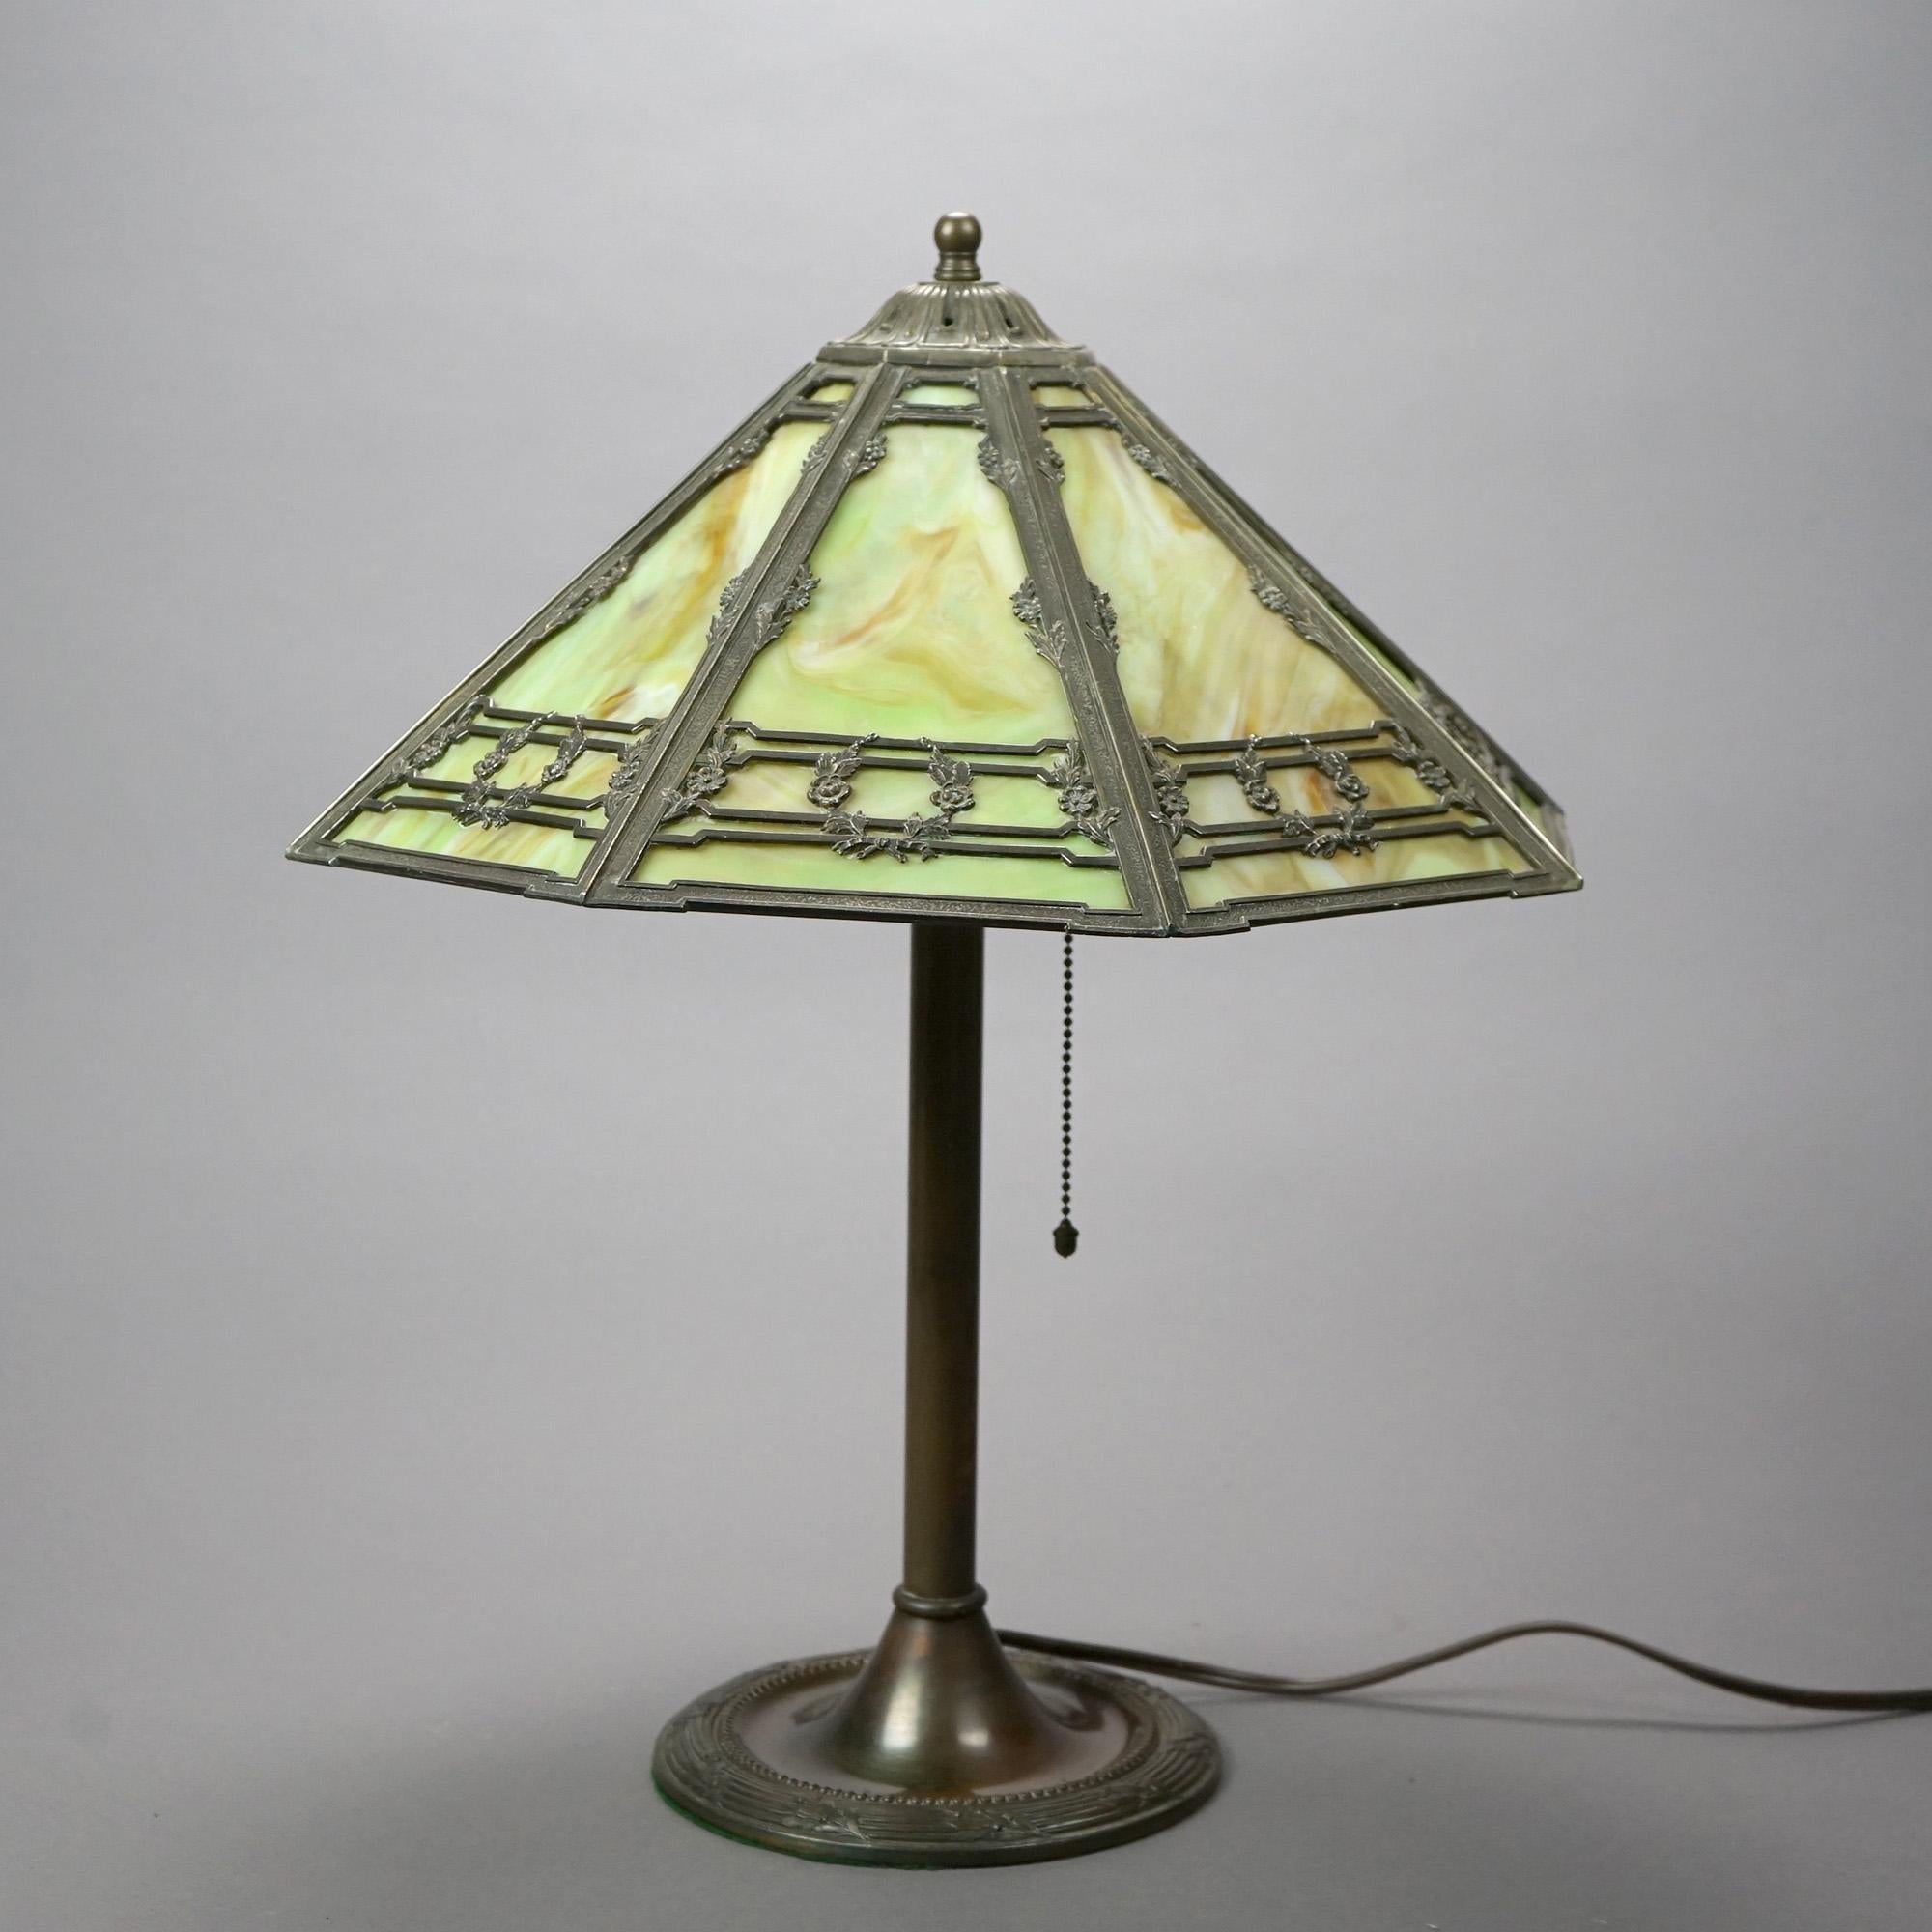 An antique Bradley & Hubbard Arts & Crafts table lamp offers slag glass paneled shade over double socket base, circa 1920

Measures- 21''H x 16.25''W x 16.25''D.